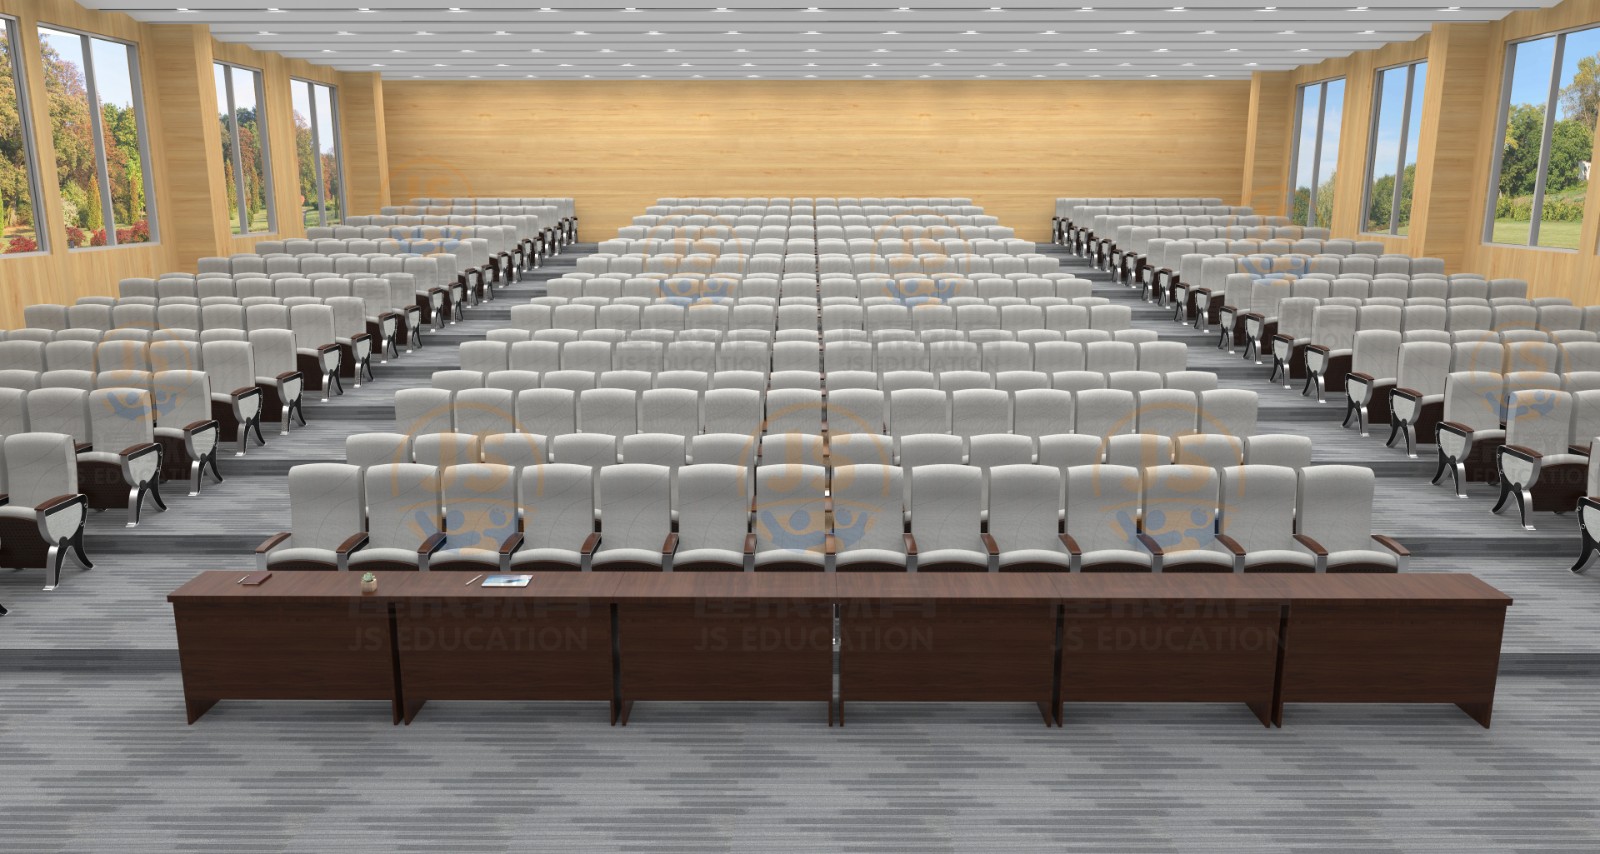 Lecture classroom